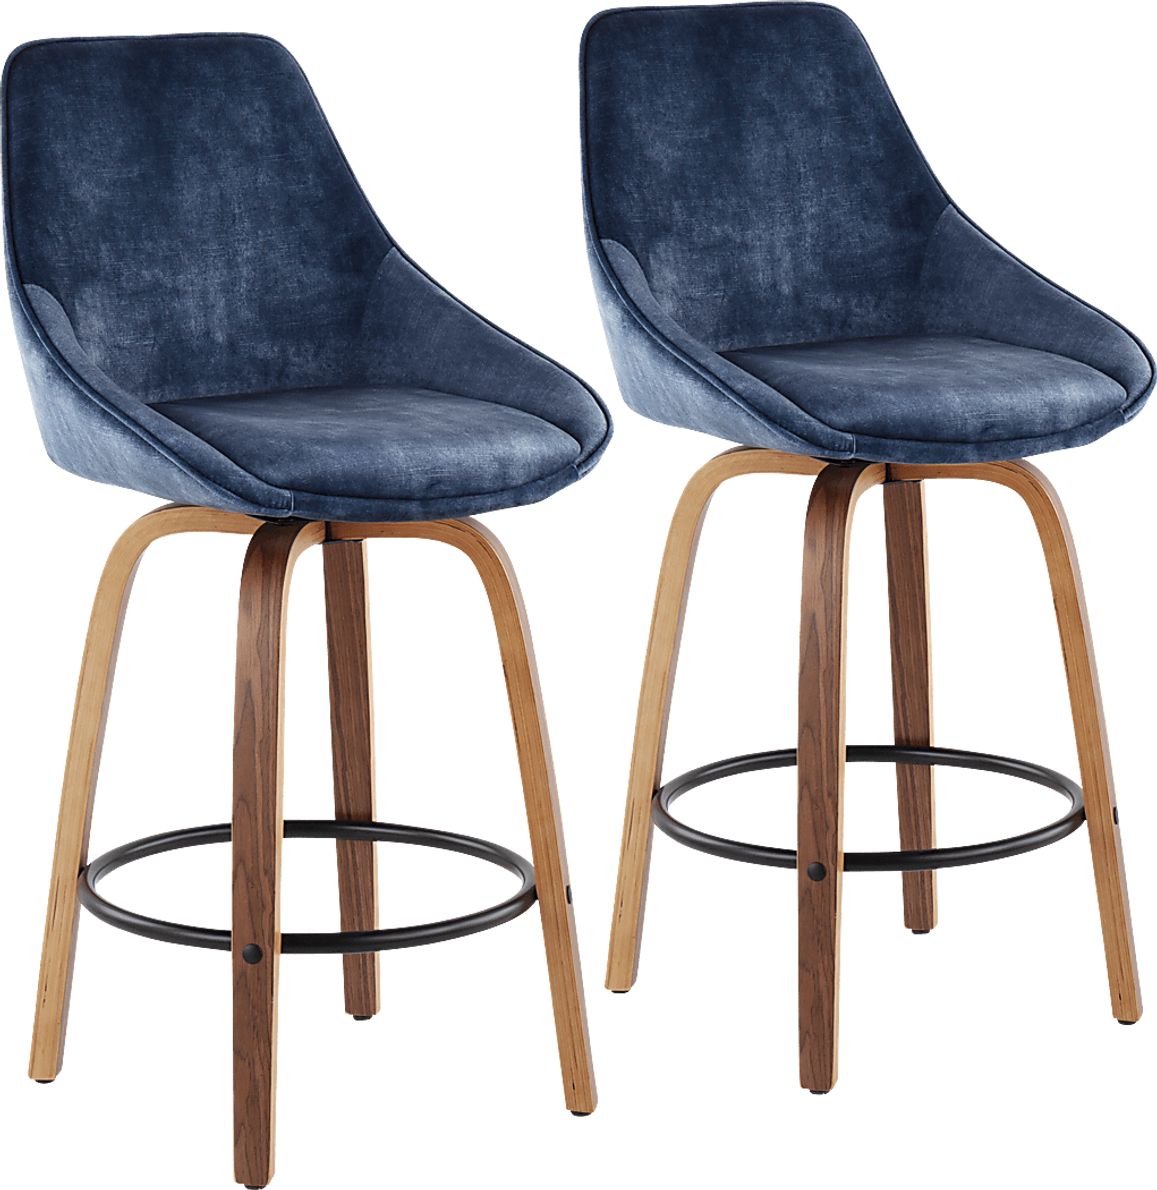 Dellrey Blue Counter Height Stool, Set of 2